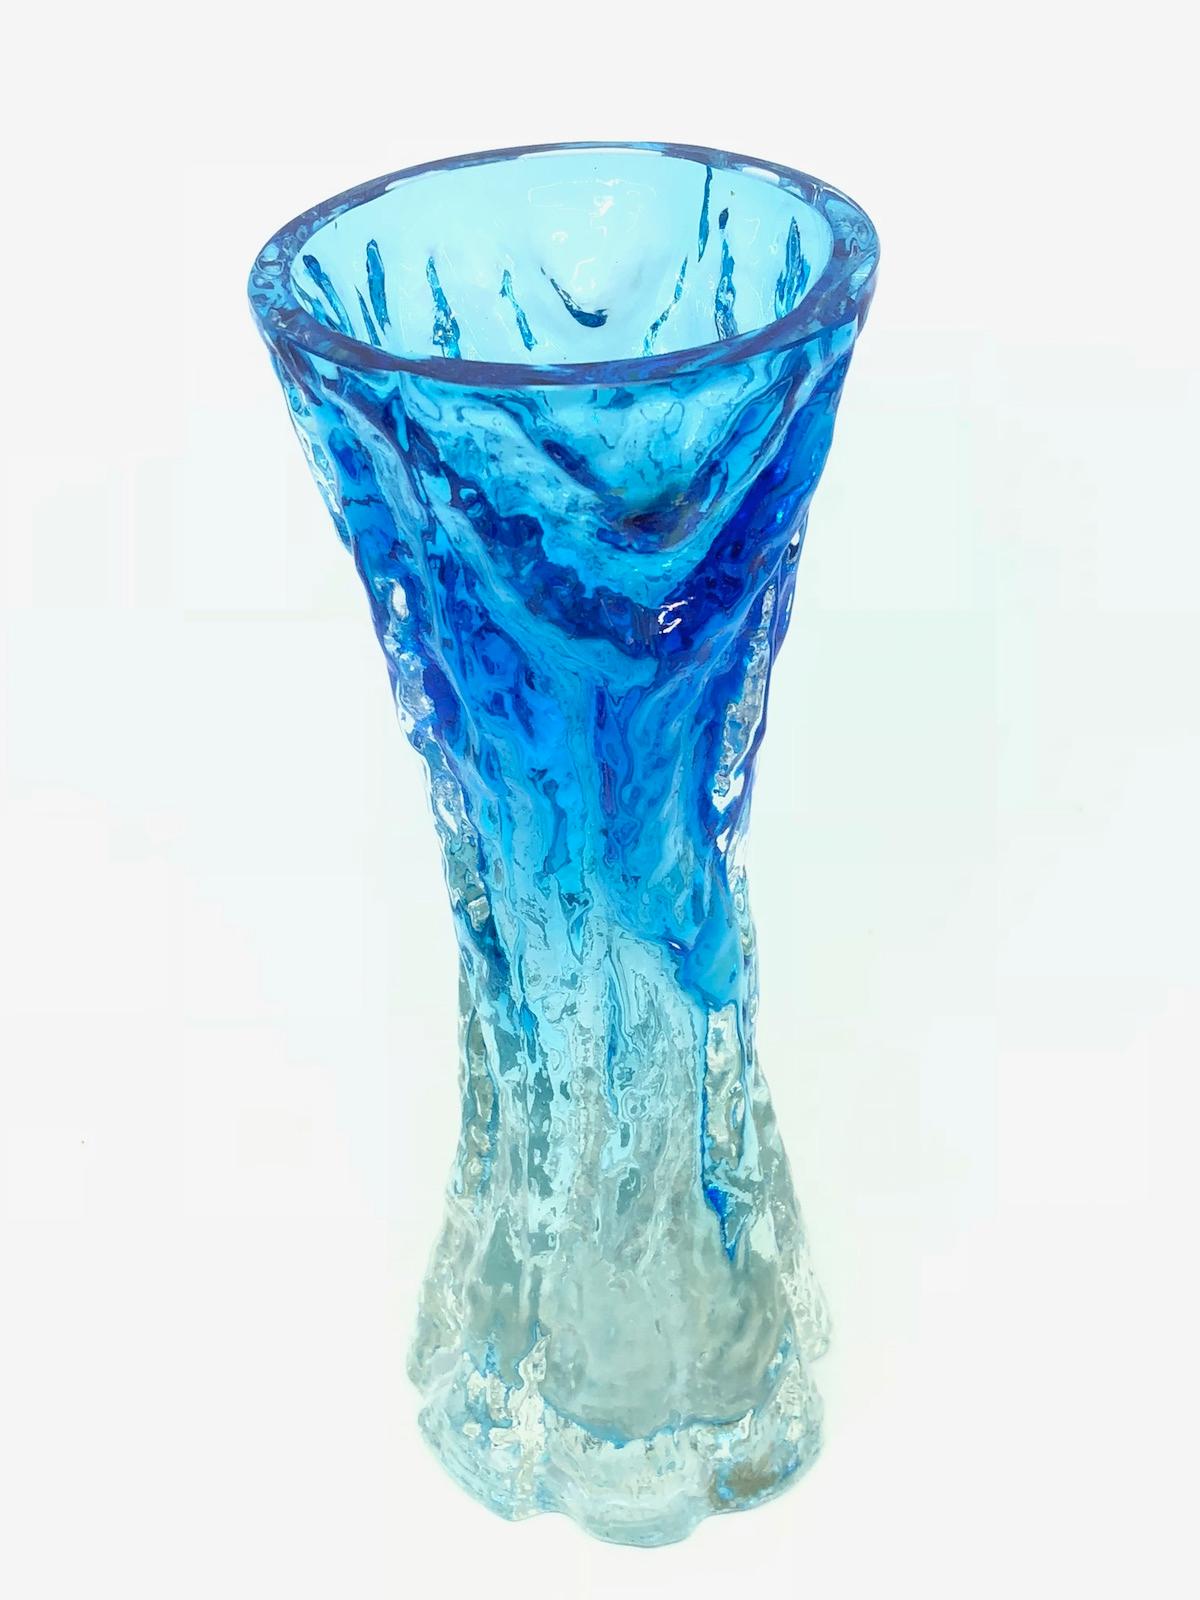 Wonderful Mid-Century Modern German vase by Ingrid Glas, circa 1970. This beautiful bright blue and clear vase brings a touch of fun and fantasy to any room with it's whimsical textured 'tree bark' form captured in vivid, vibrant blue coloured mouth